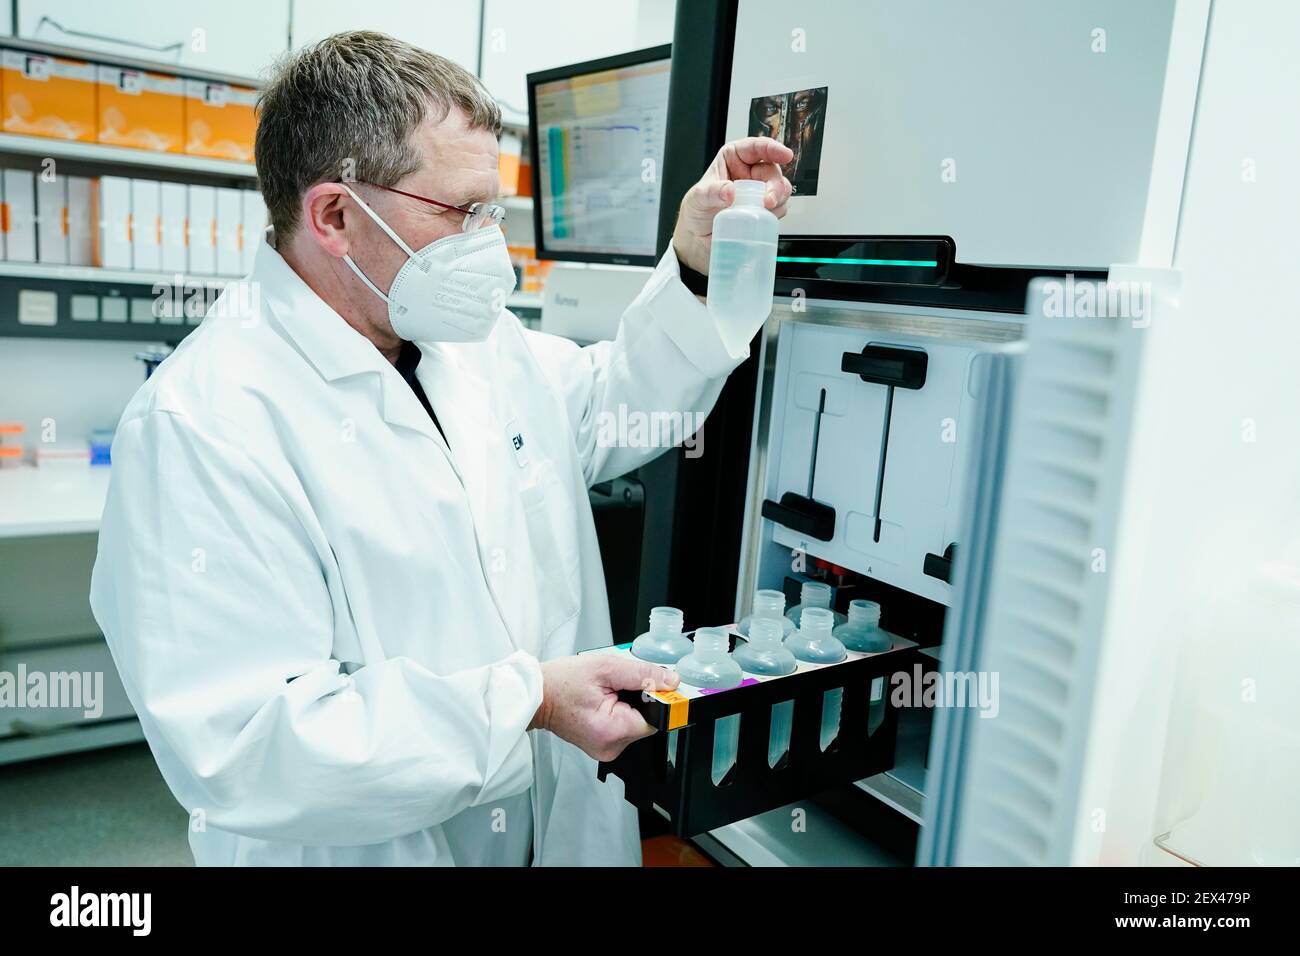 Heidelberg Germany 04th Mar 2021 Vladimir Benes Head Of Genomics Core Facility Takes A Container Out Of A Cabinet In A Sequencing Laboratory At The European Molecular Biology Laboratory Embl In The